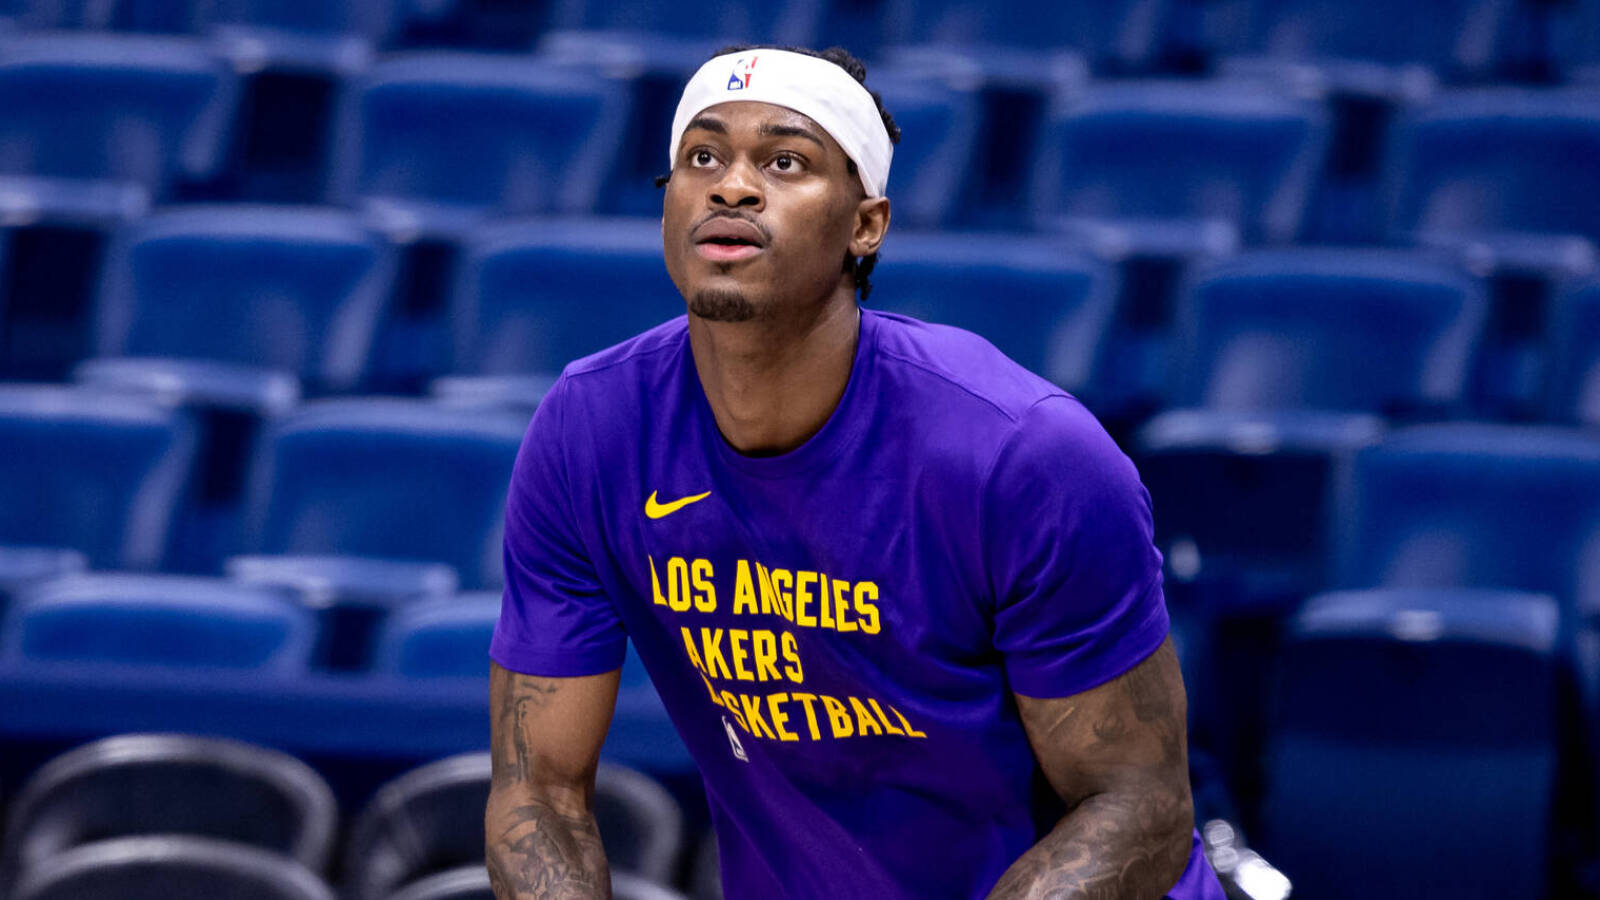 Report: Lakers could get surprise player back from injury for Nuggets series